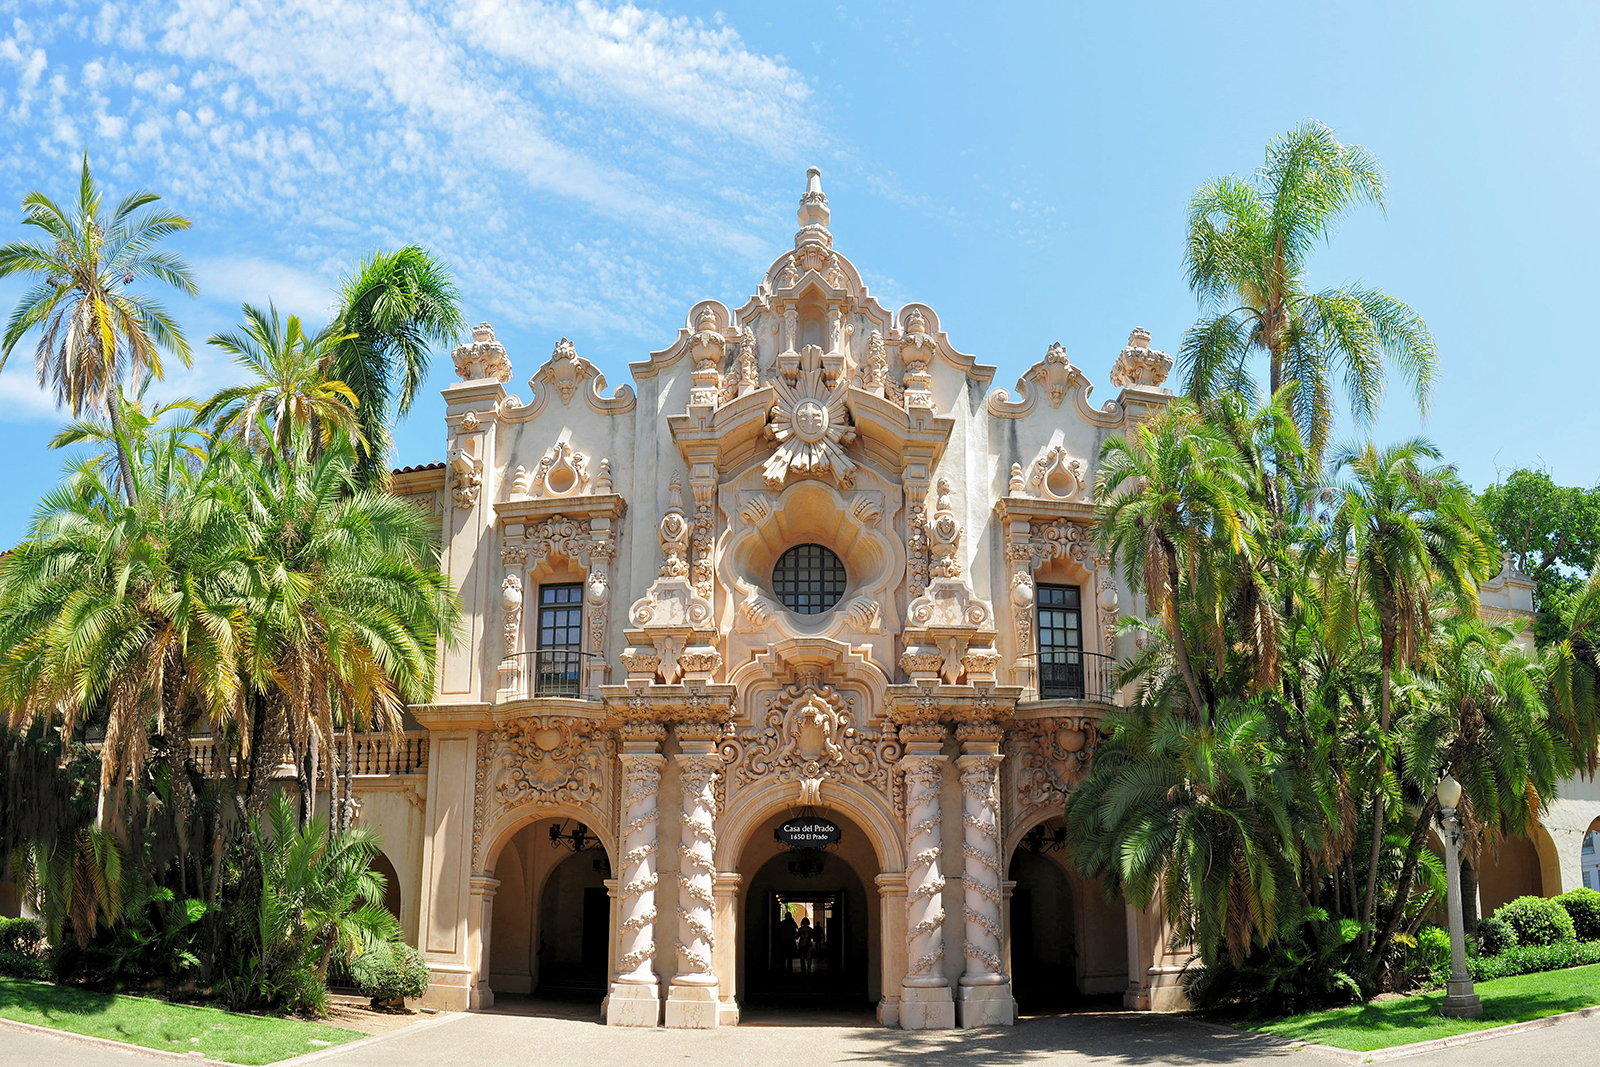 Spanish architecture building with palm trees in Balboa park, San Diego California